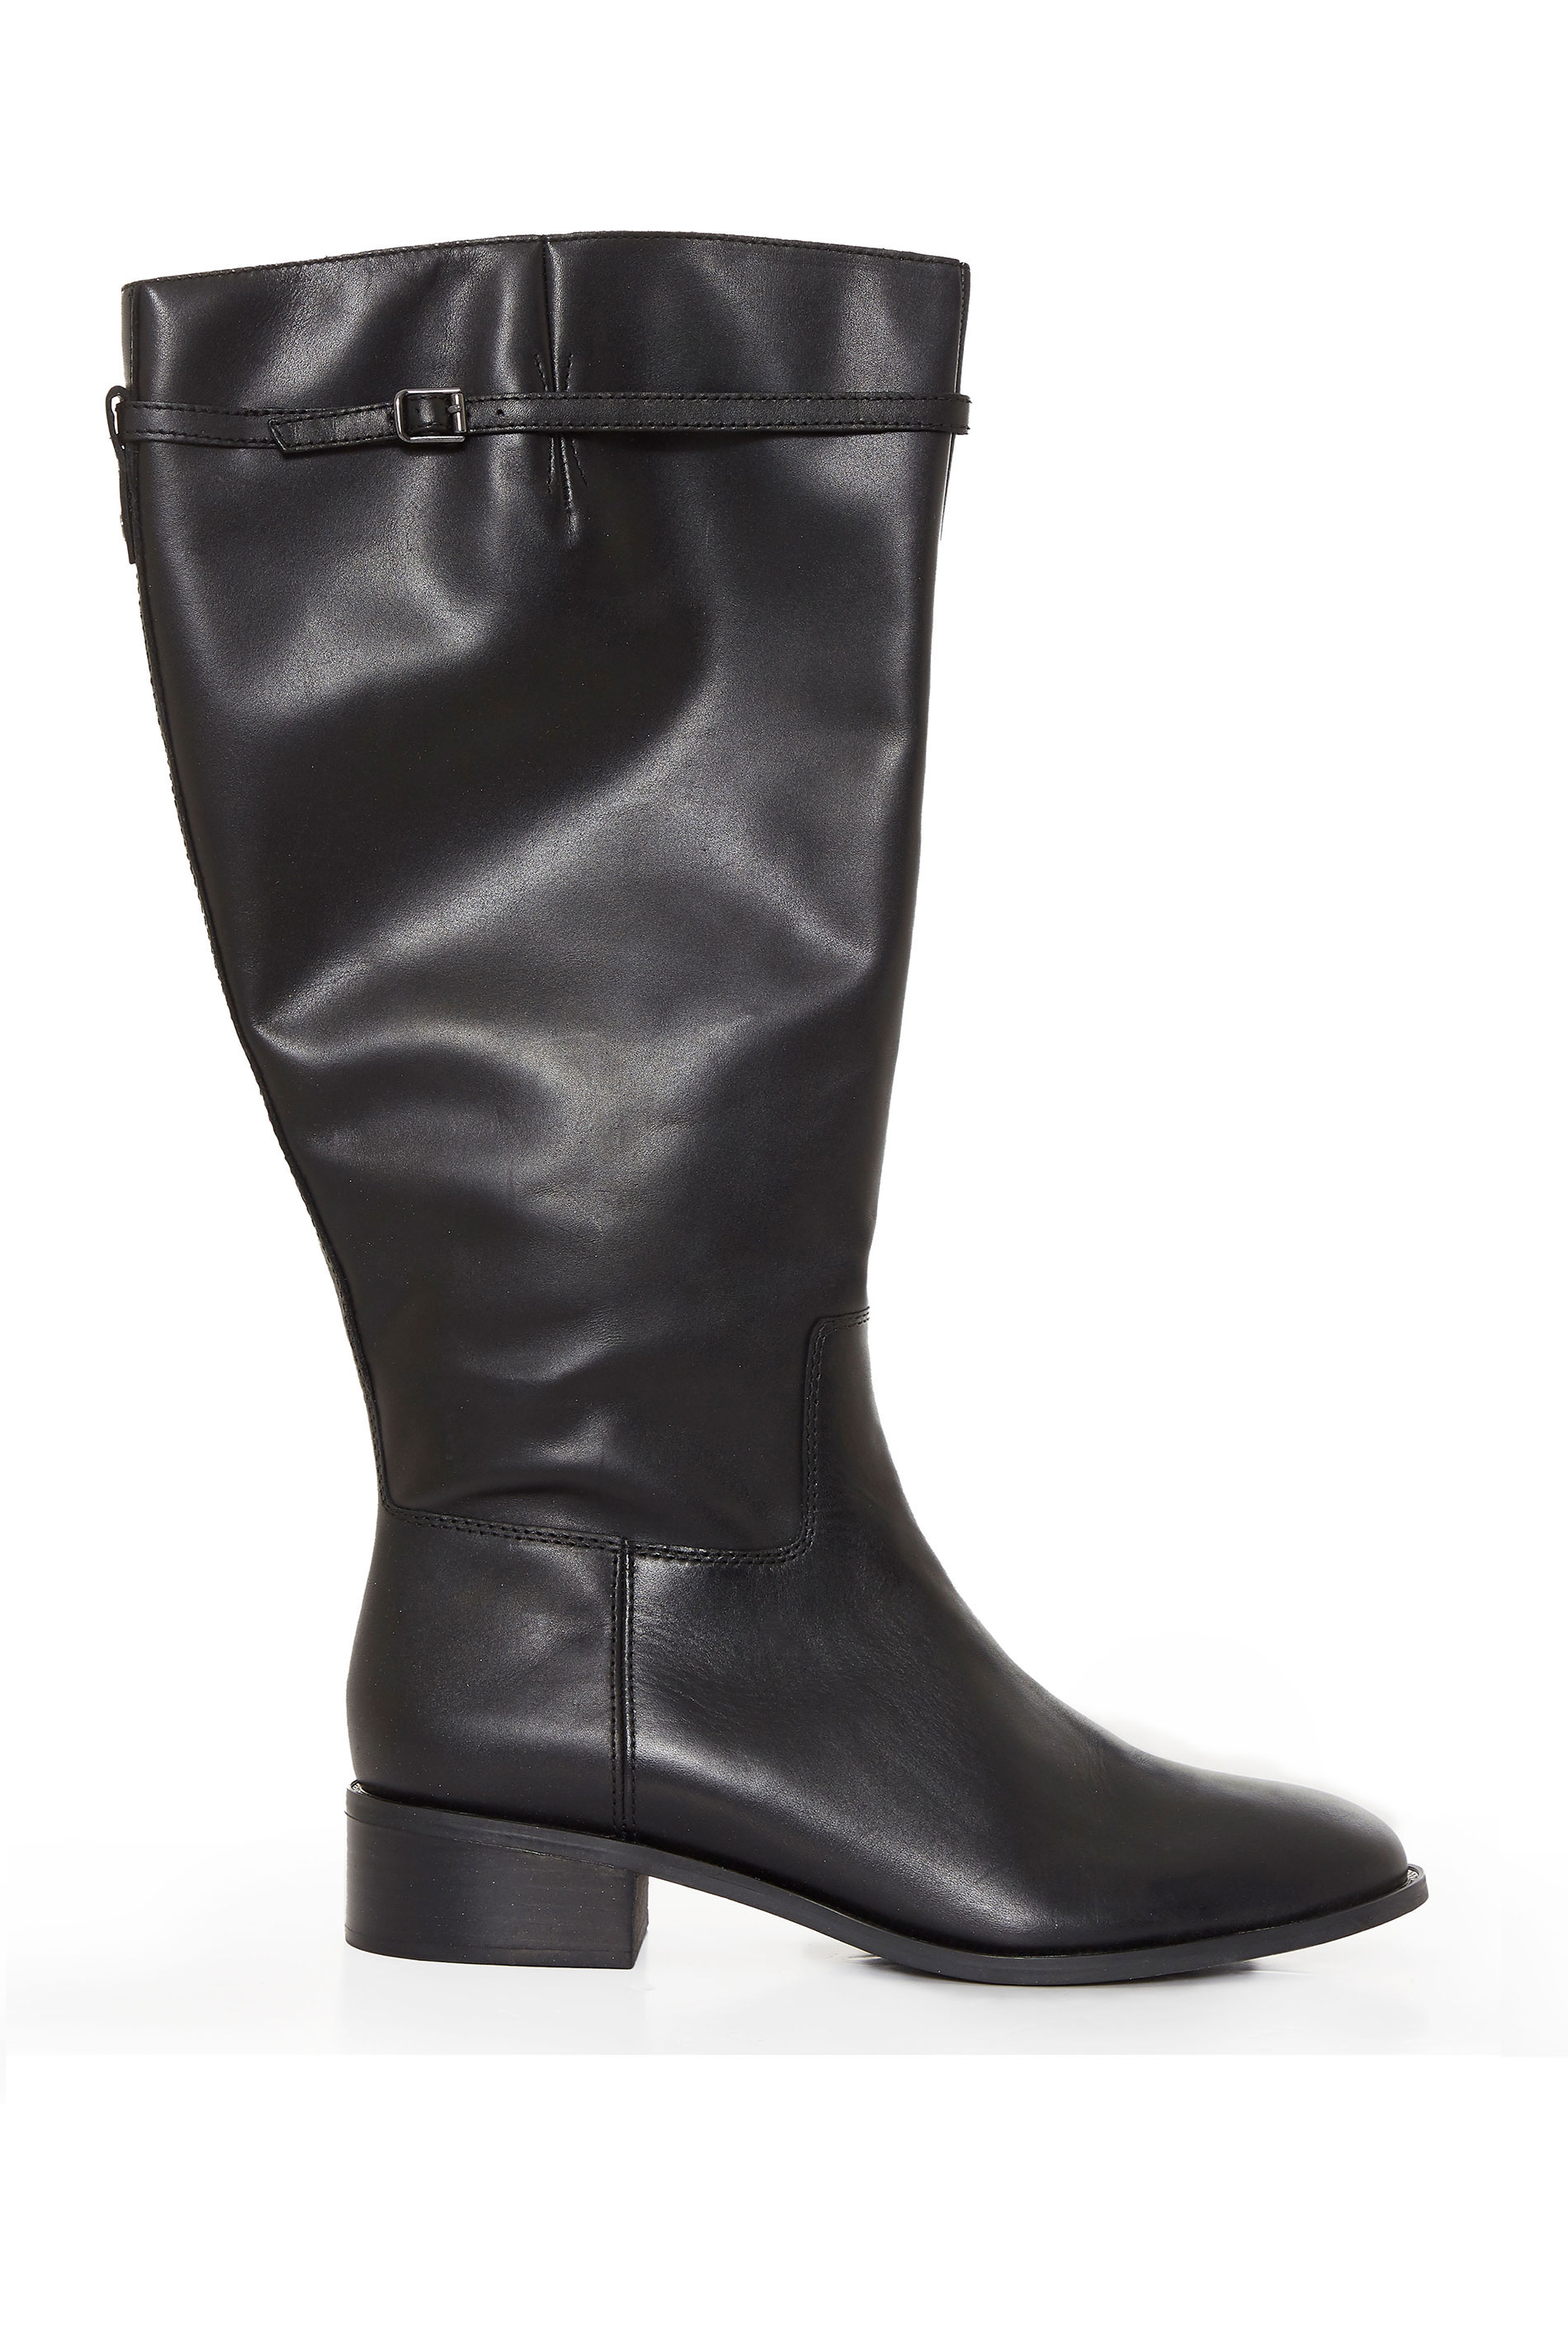 FRANCO SARTO Black Belaire Leather Calf Boots | Long Tall Sally